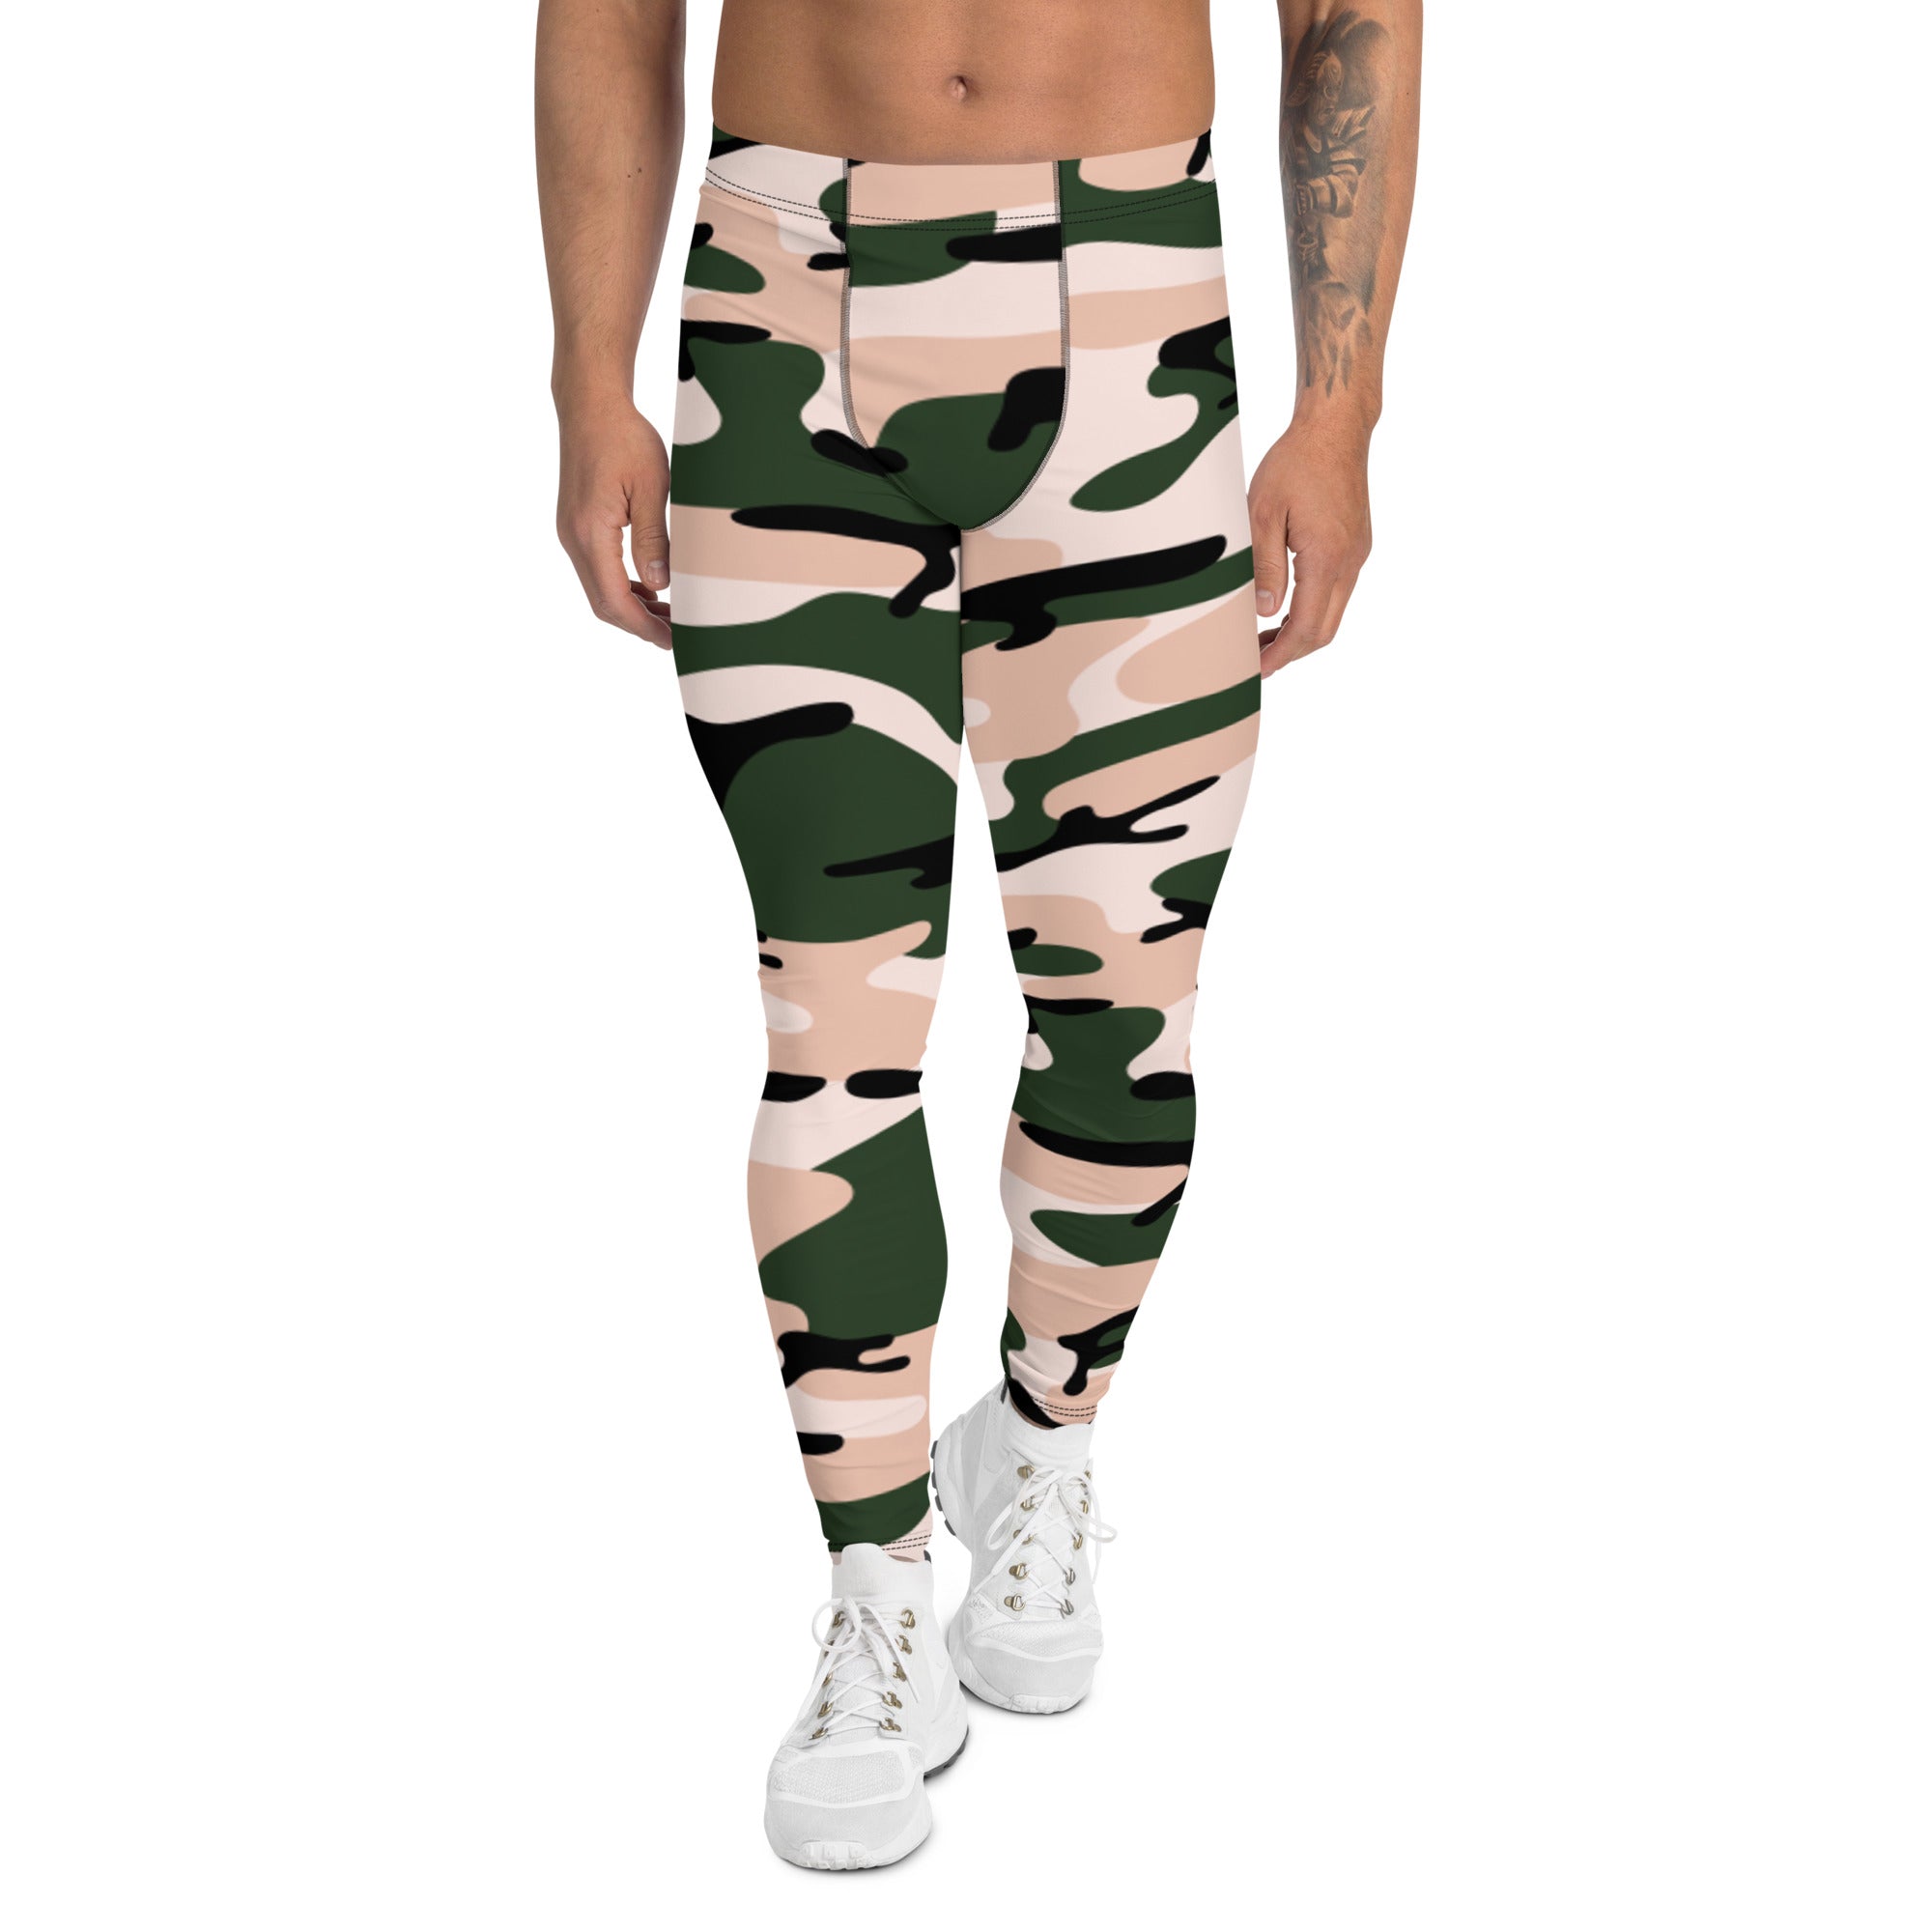 Army Leggings for Women, Army Track Lower for Sports Gym Athletic Training  Workout - Green Camouflage Print ndash; Free Size 26 to 34 pack of 1